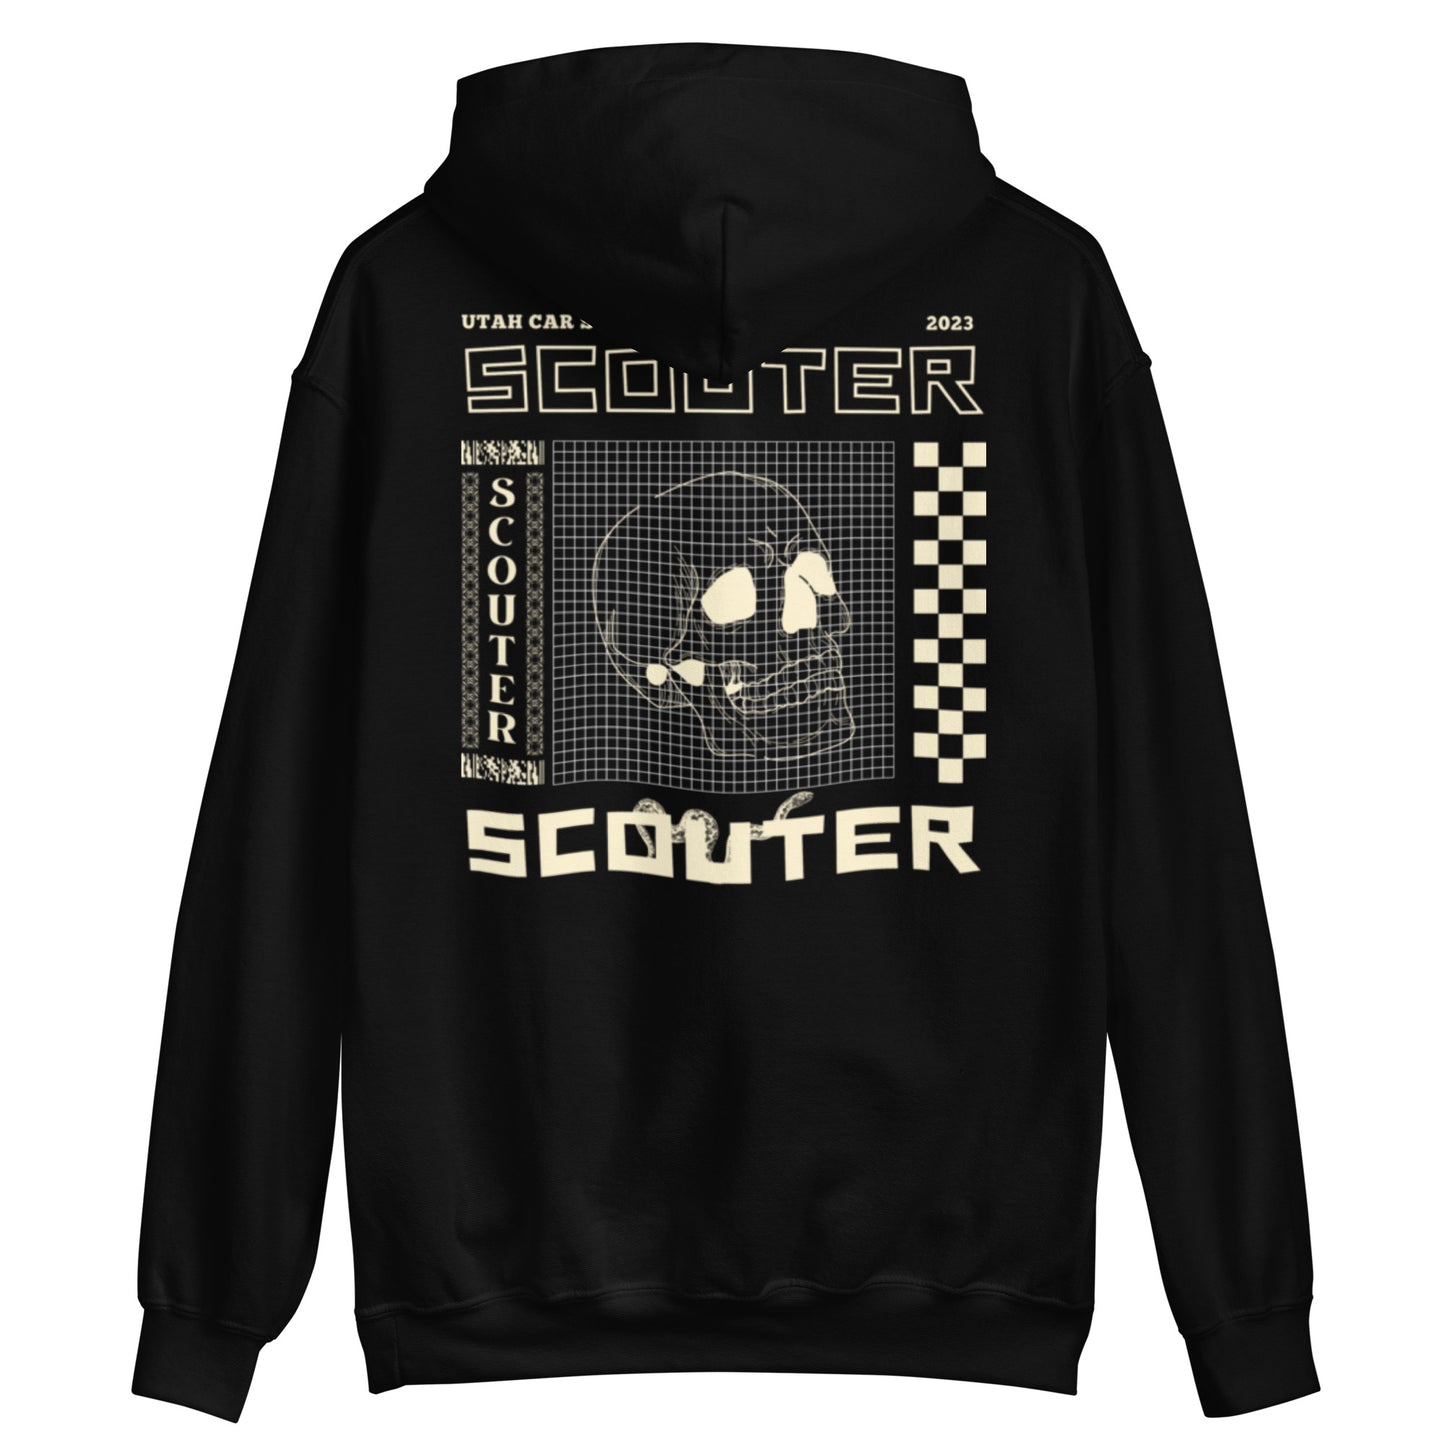 SCOUTER GOTHIC UNISEX HOODIE